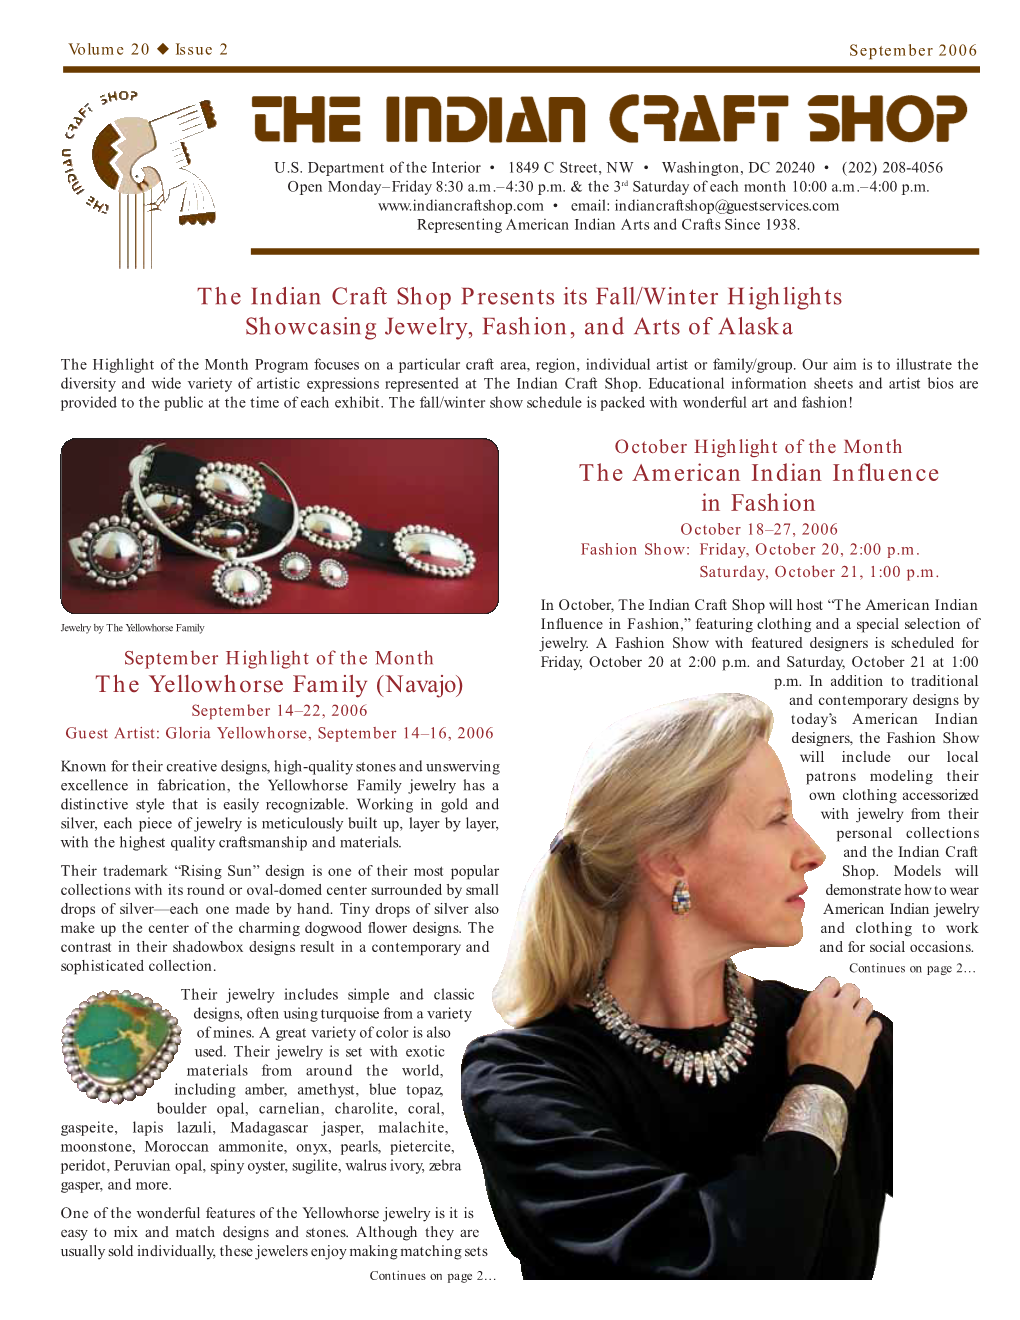 The Indian Craft Shop Presents Its Fall/Winter Highlights Showcasing Jewelry, Fashion, and Arts of Alaska